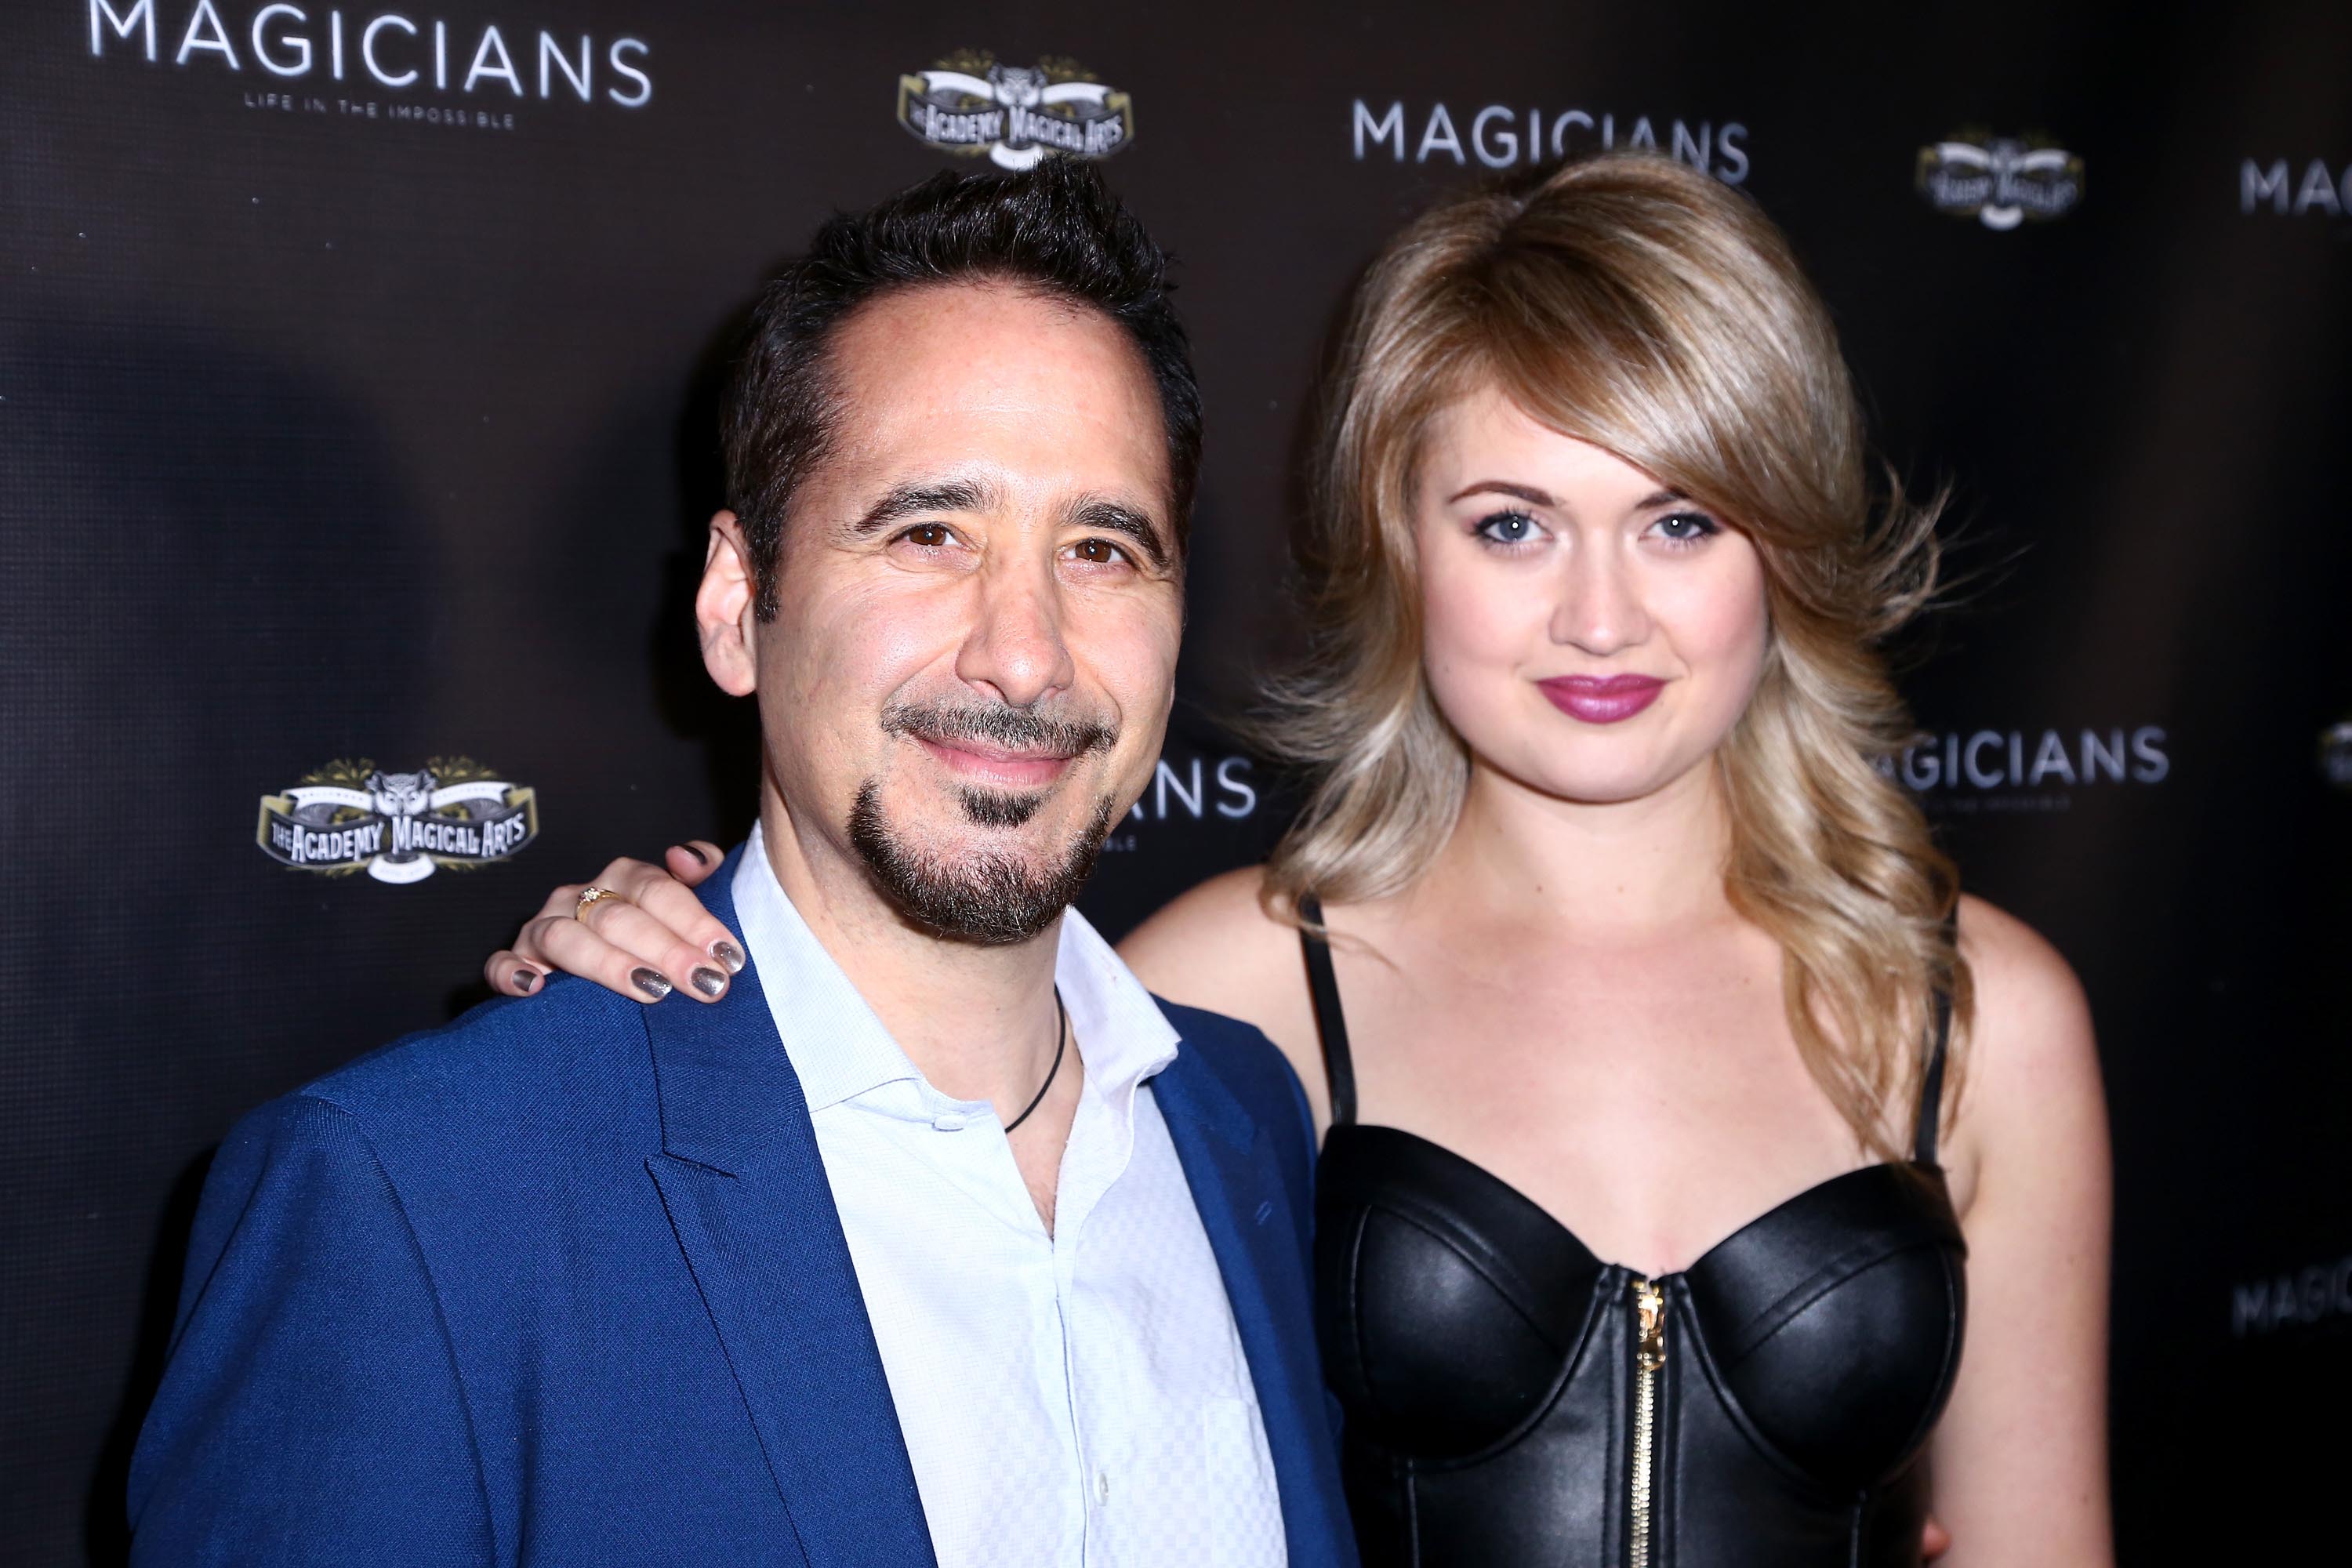 Chloe Rosenthal attend the premiere of Subjective Films’ ‘Magicians: Life In The Impossible’